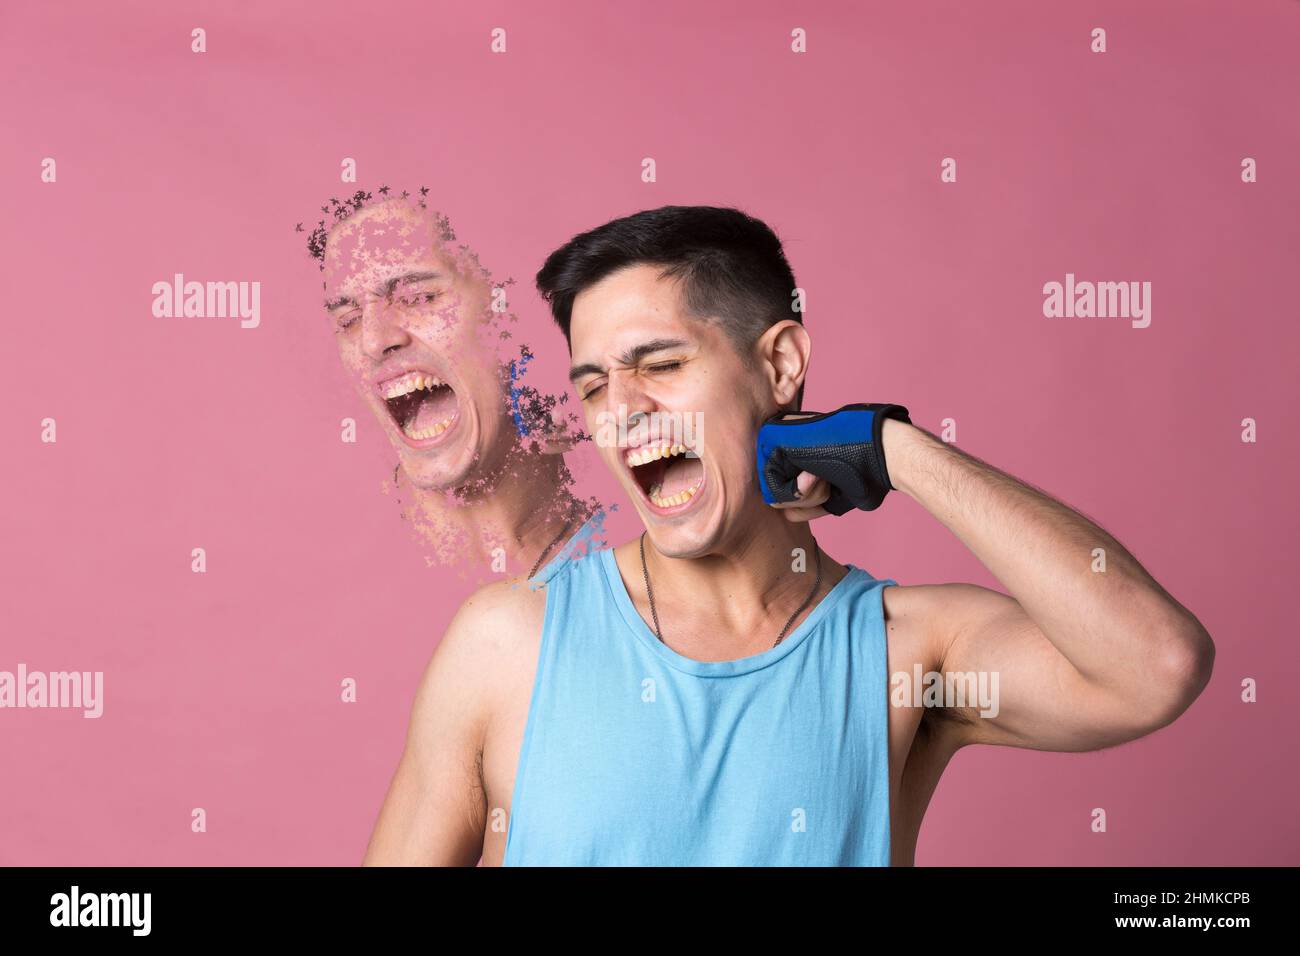 hurting oneself and suffering pain as a result Stock Photo